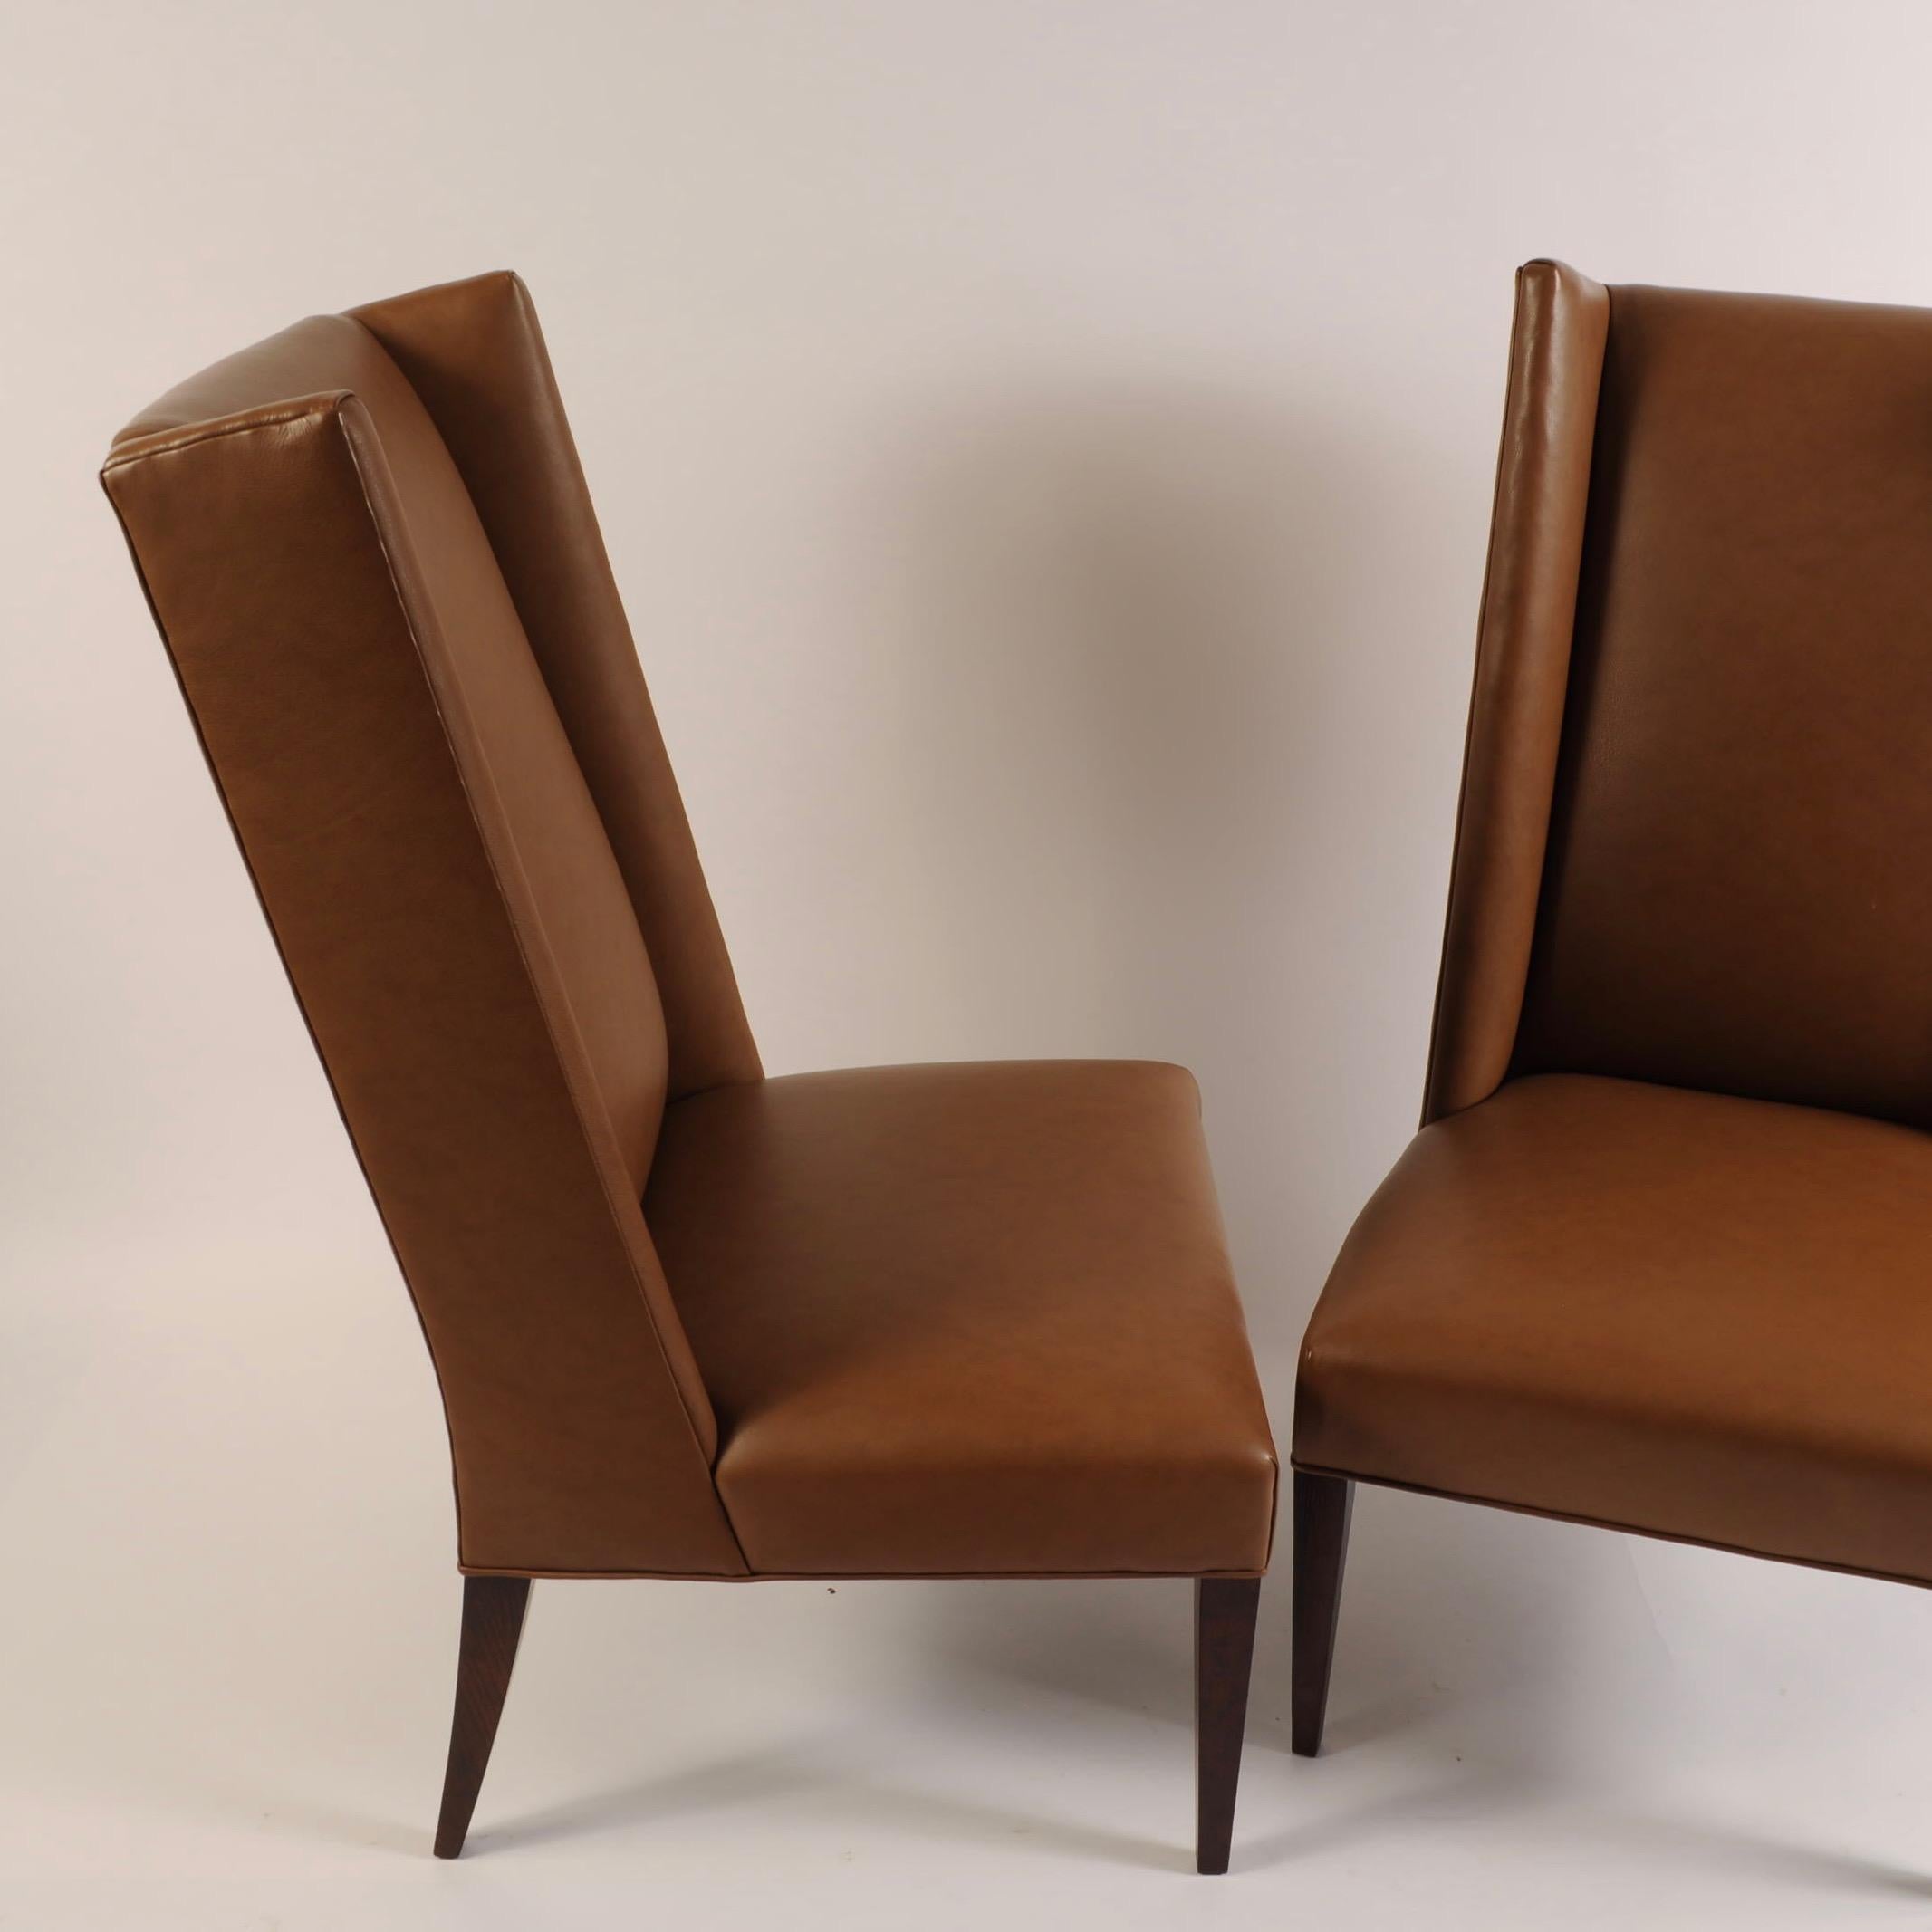 Two glove brown leather-like Naugahyde chairs by North Carolina furniture maker Hickory Chair. Legs are dark walnut.